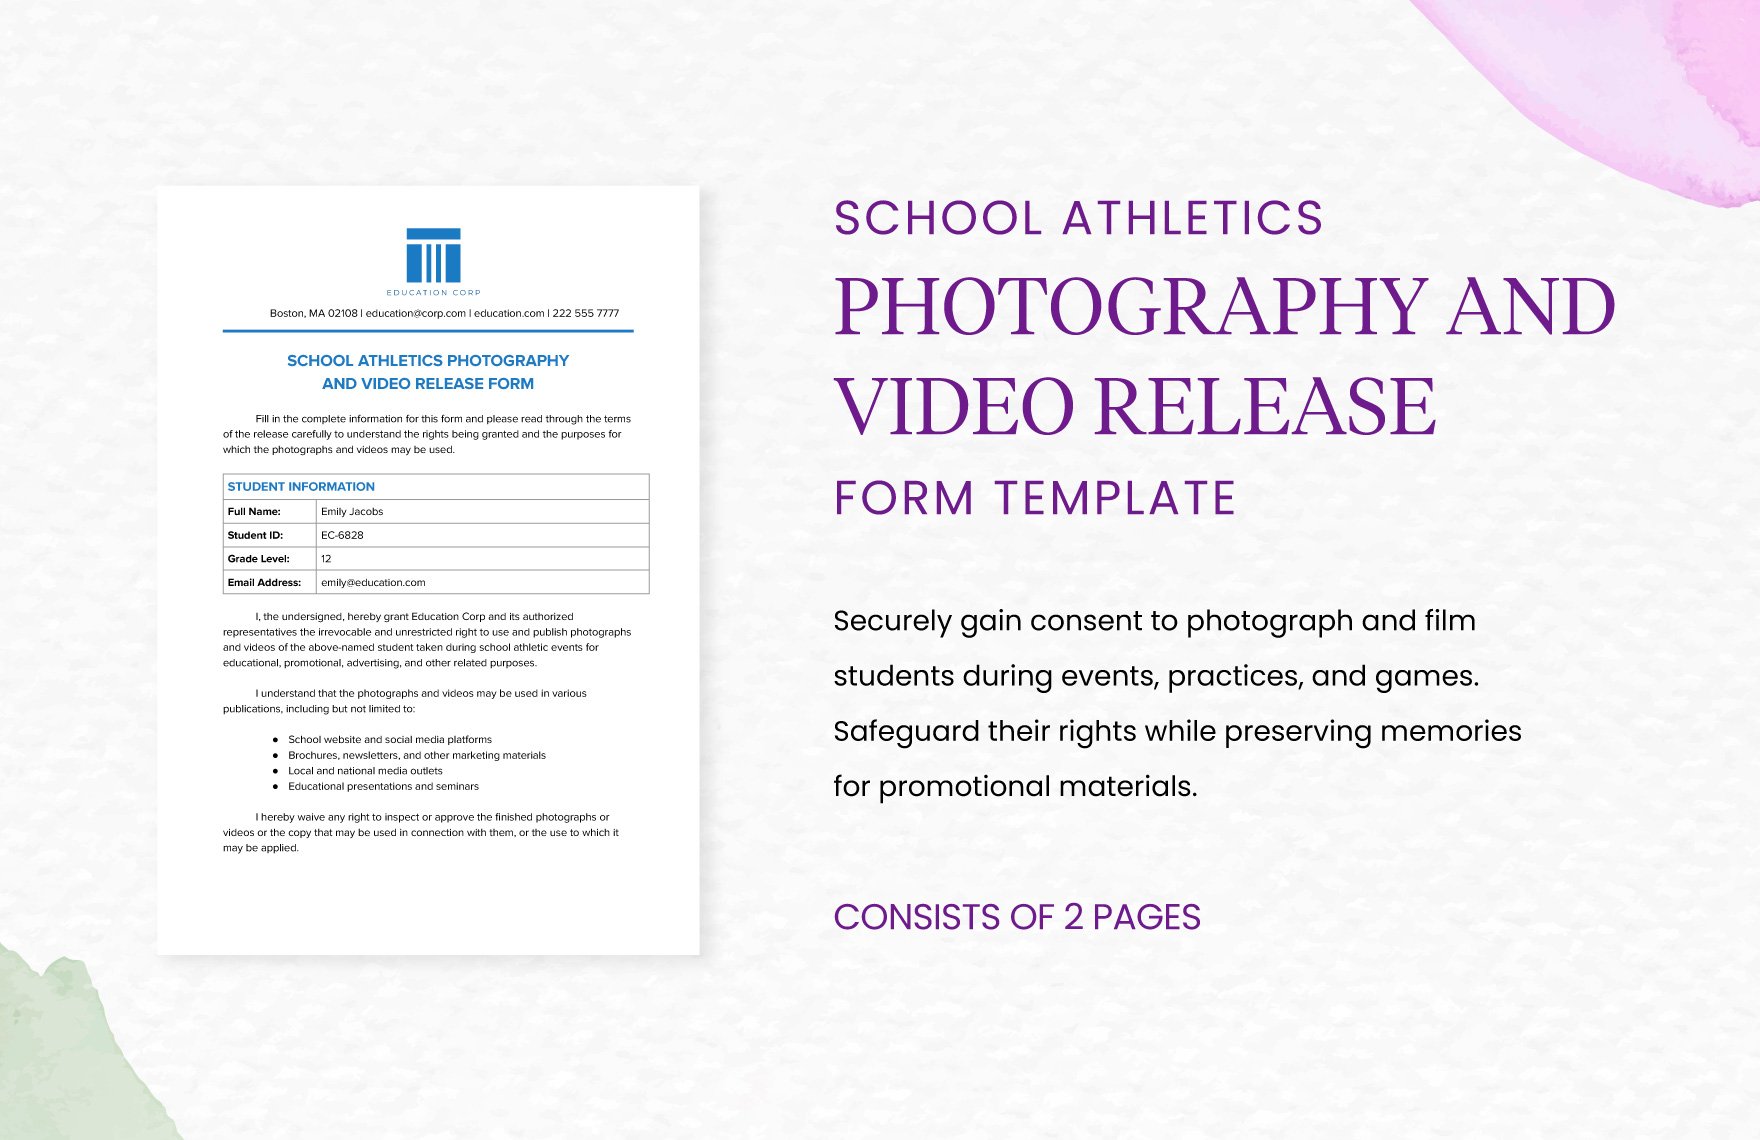 School Athletics Photography and Video Release Form Template